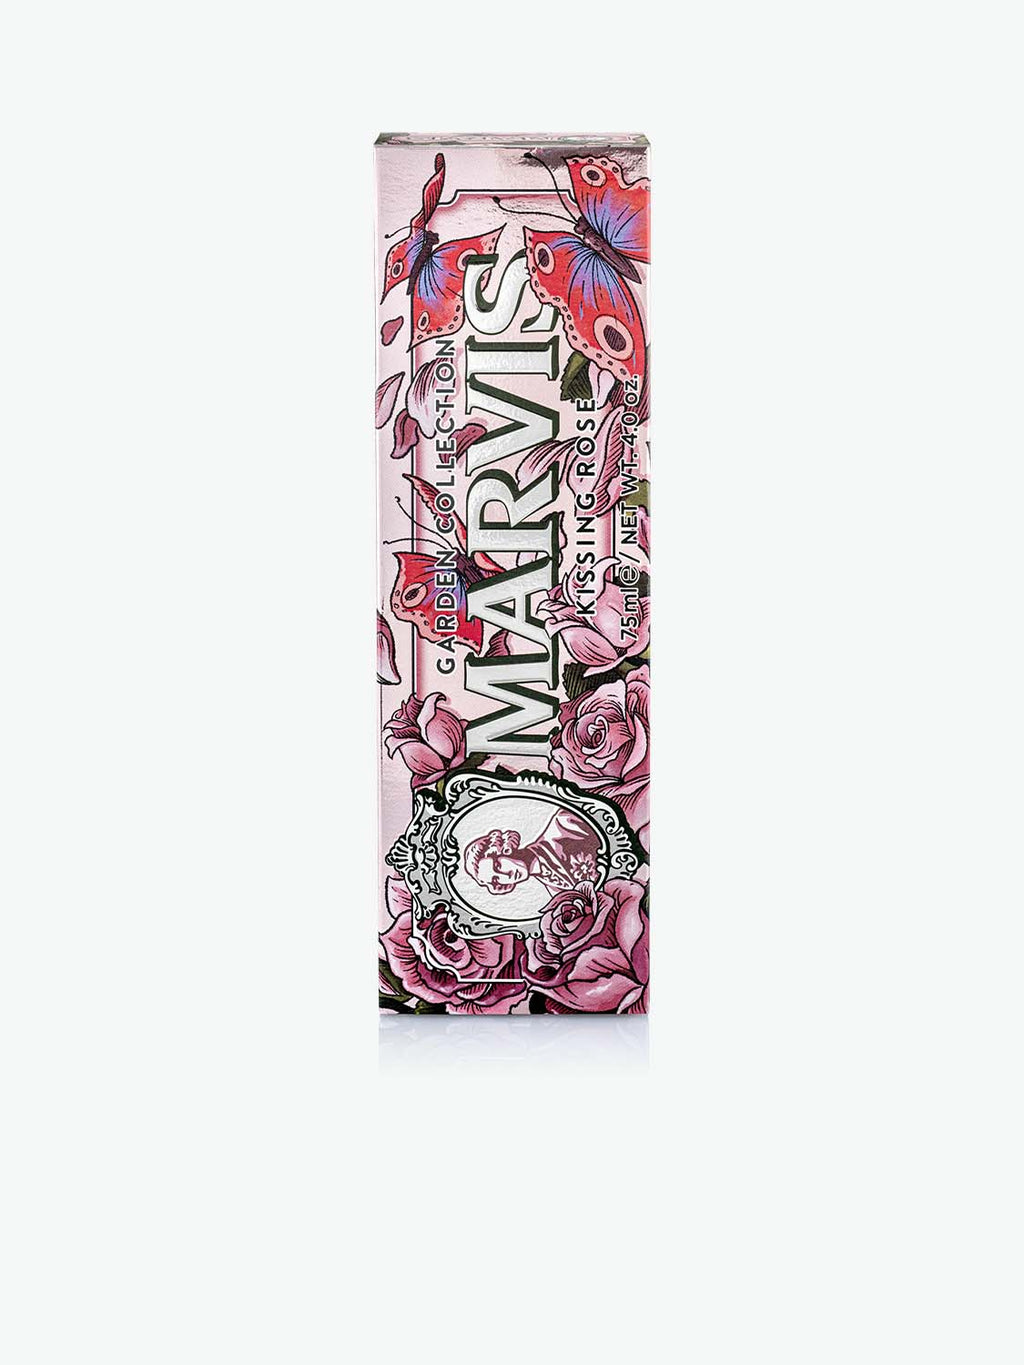 Marvis Kissing Rose Limited Edition Toothpaste